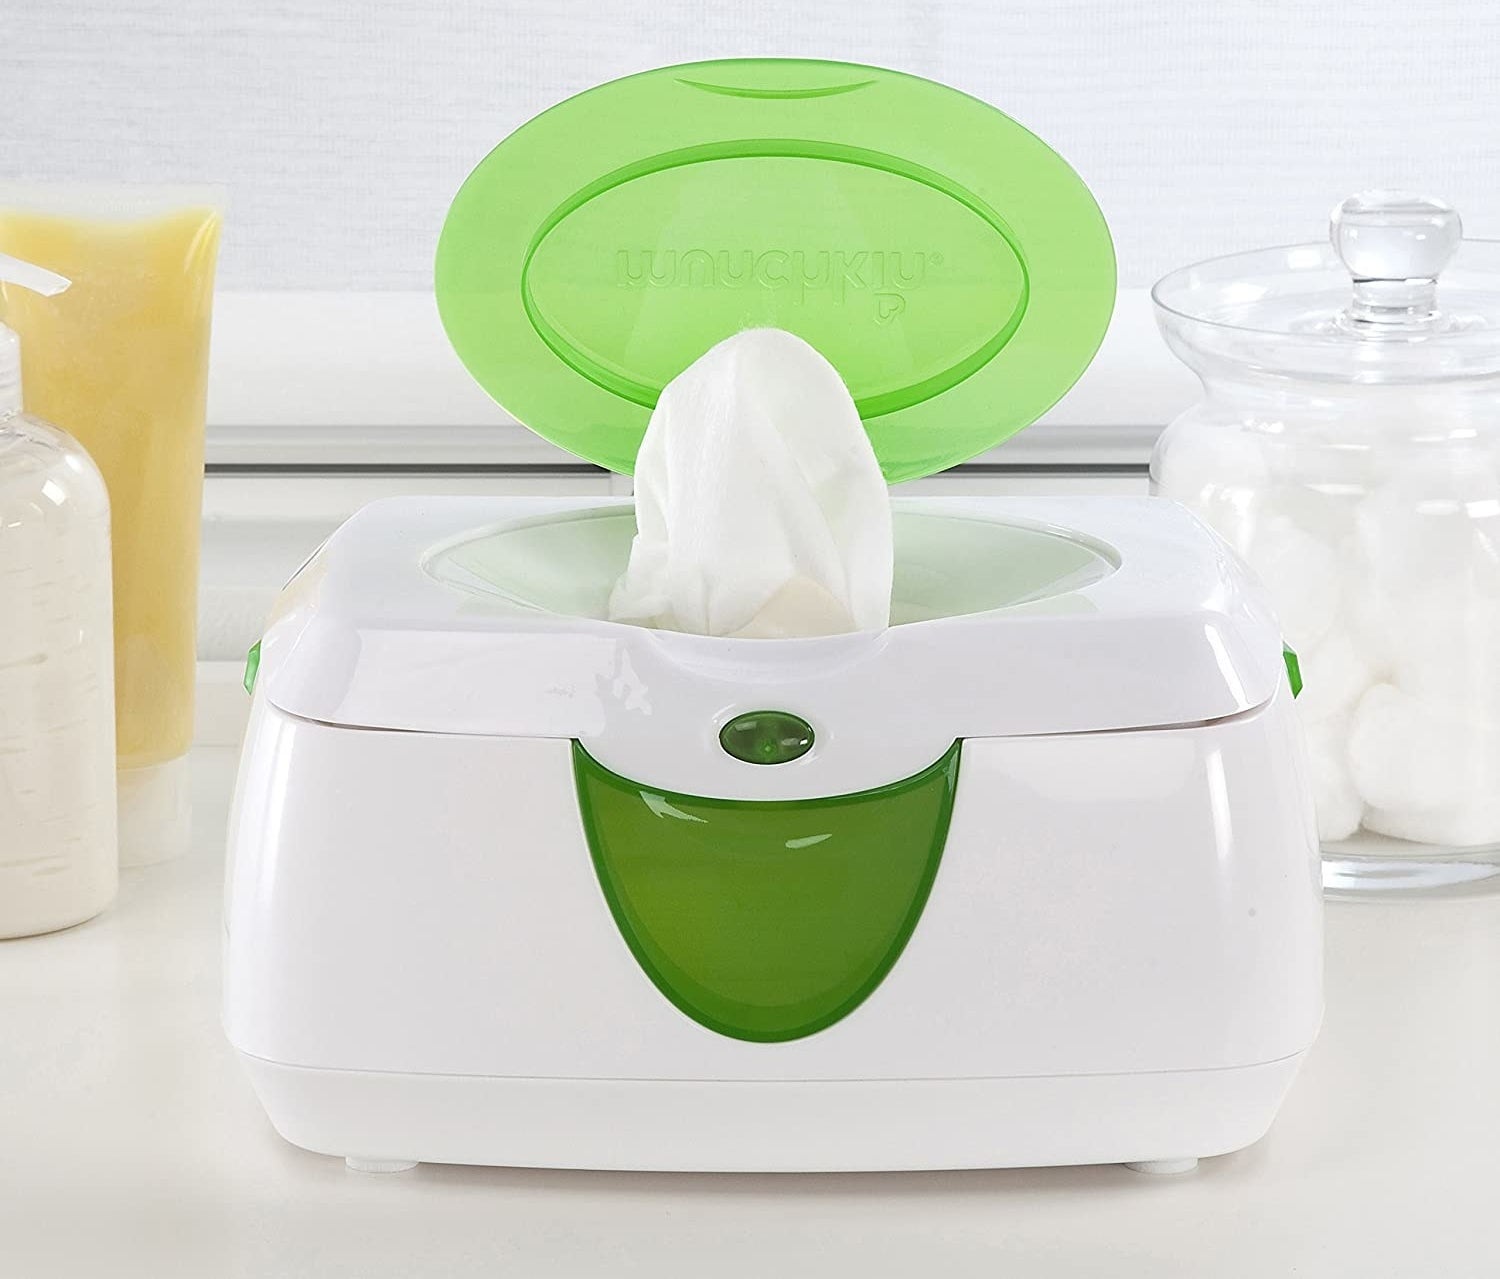 A white and green plastic wipe warmer